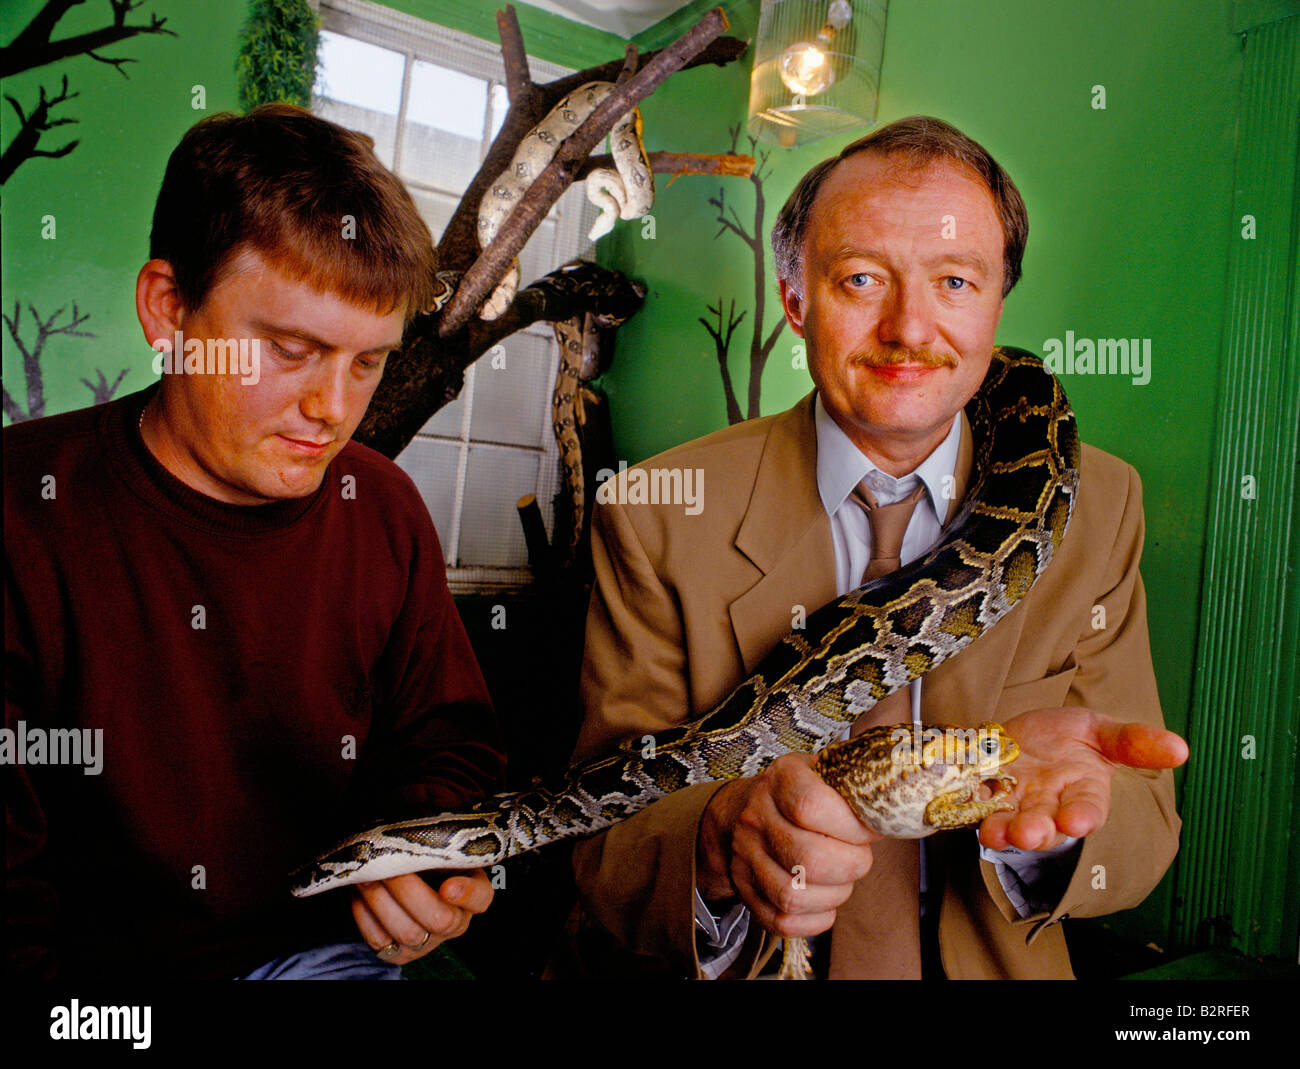 KEN LIVINGSTONE MP HIS HOBBY IS COLLECTING REPTILES AMPHIBIANS 1992 Stock Photo